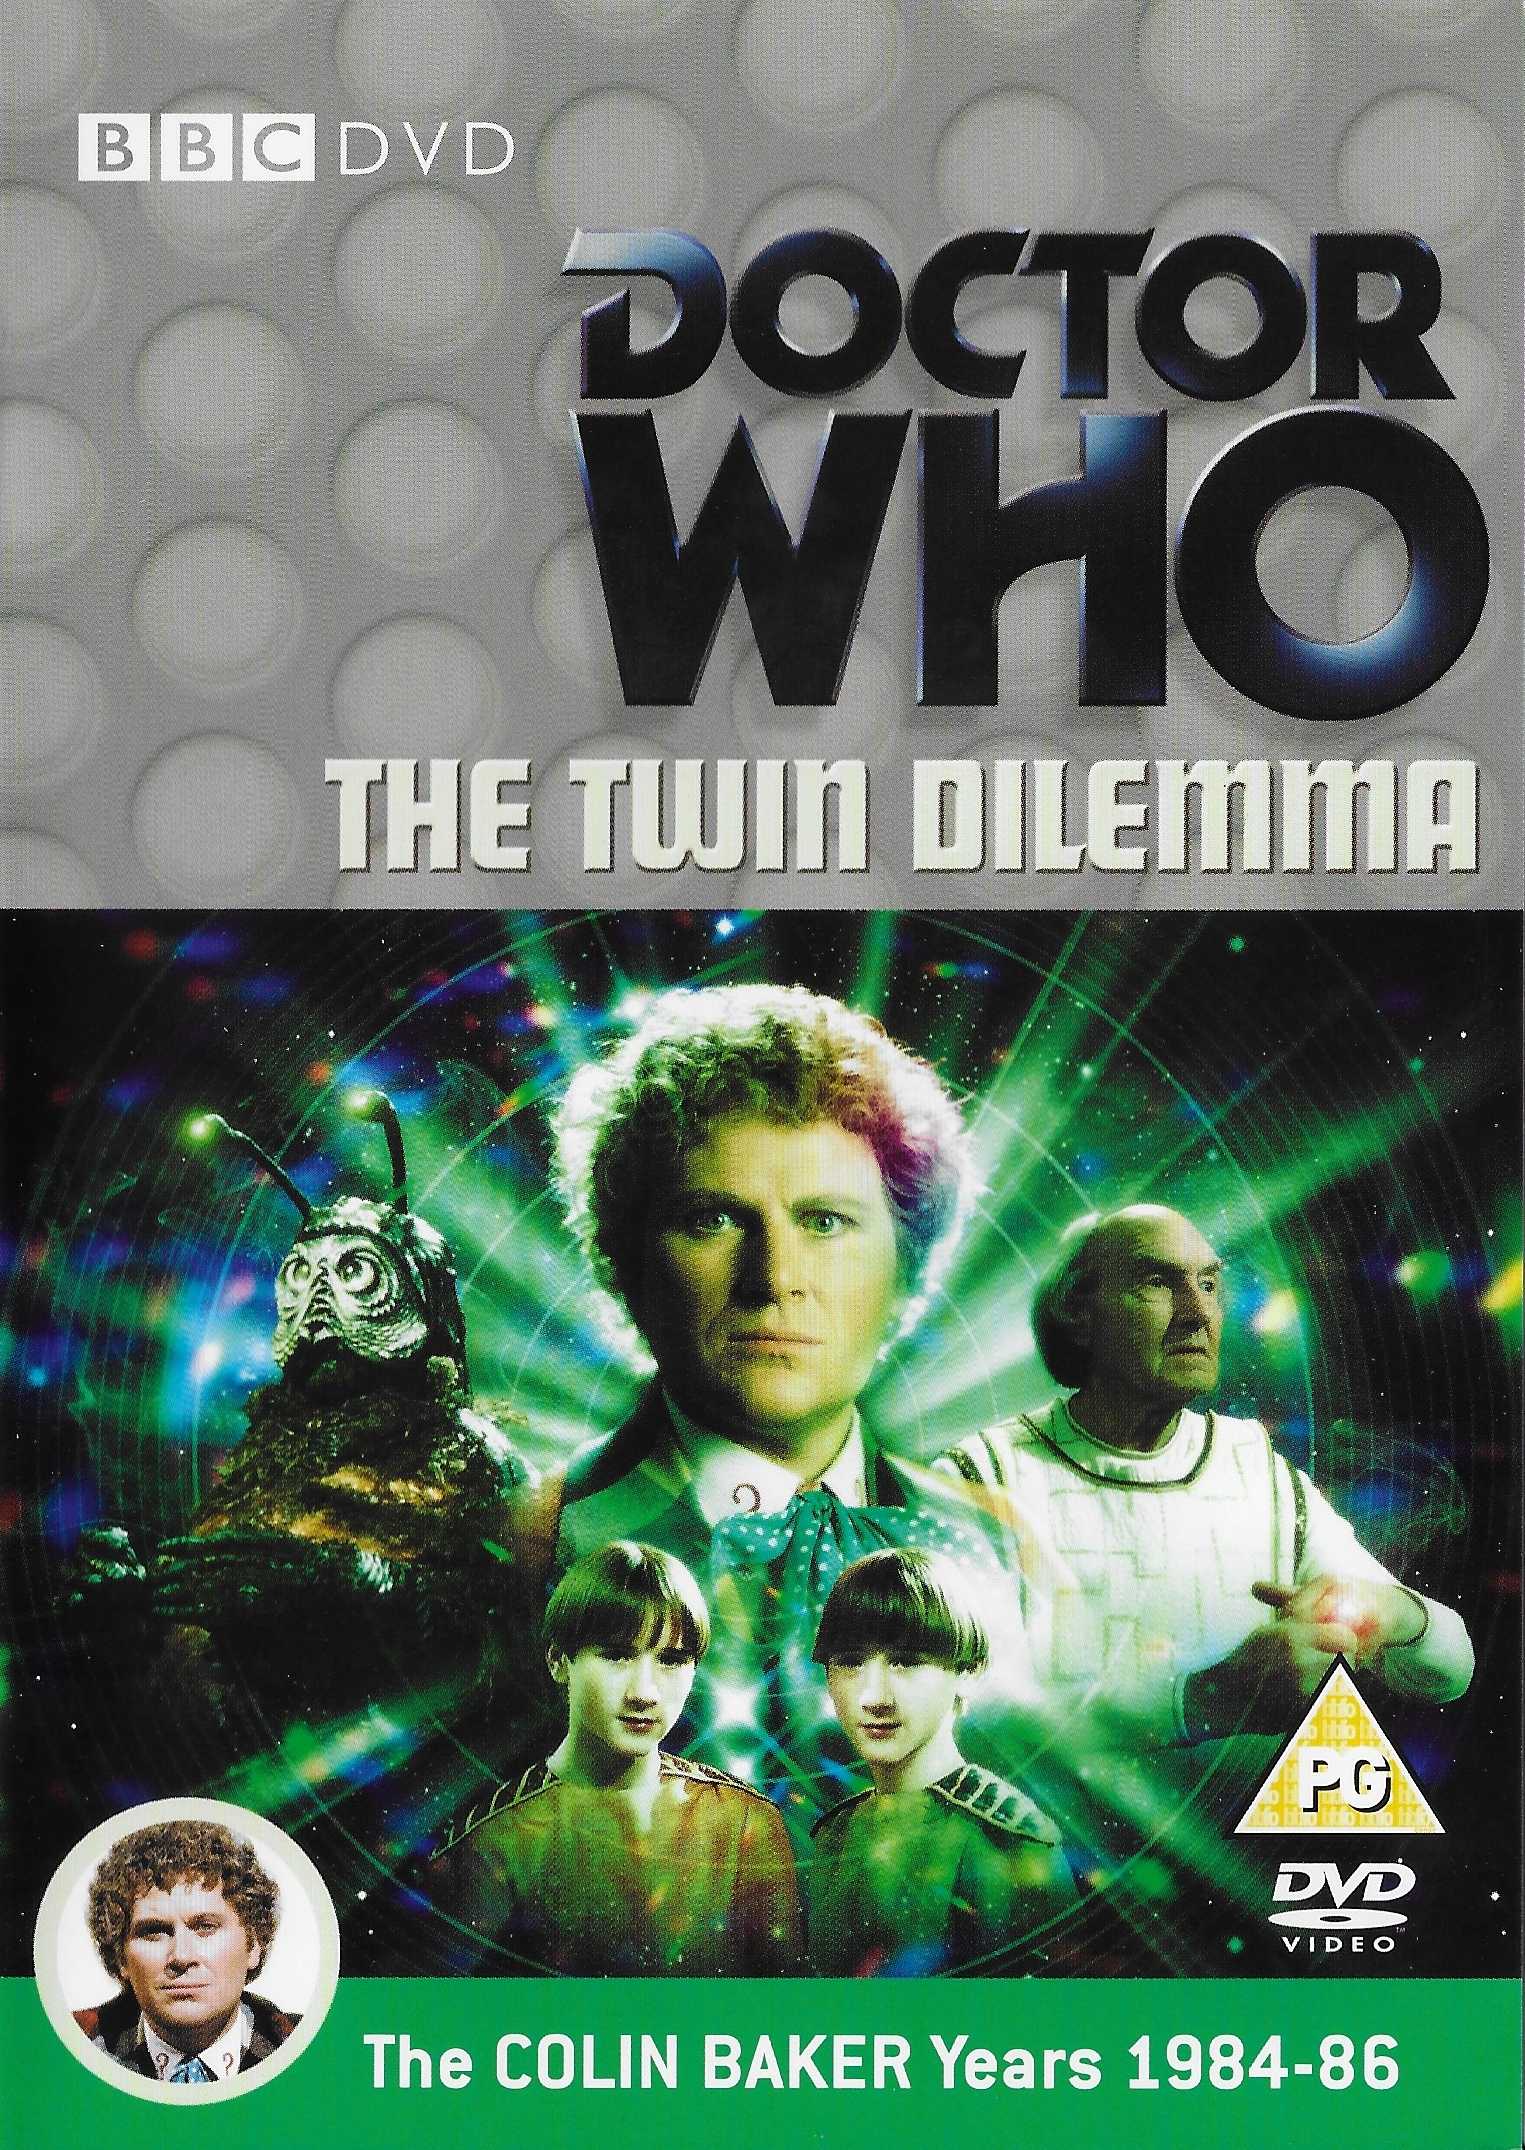 Picture of BBCDVD 2598 Doctor Who - The twin dilemma by artist Anthony Steven from the BBC records and Tapes library